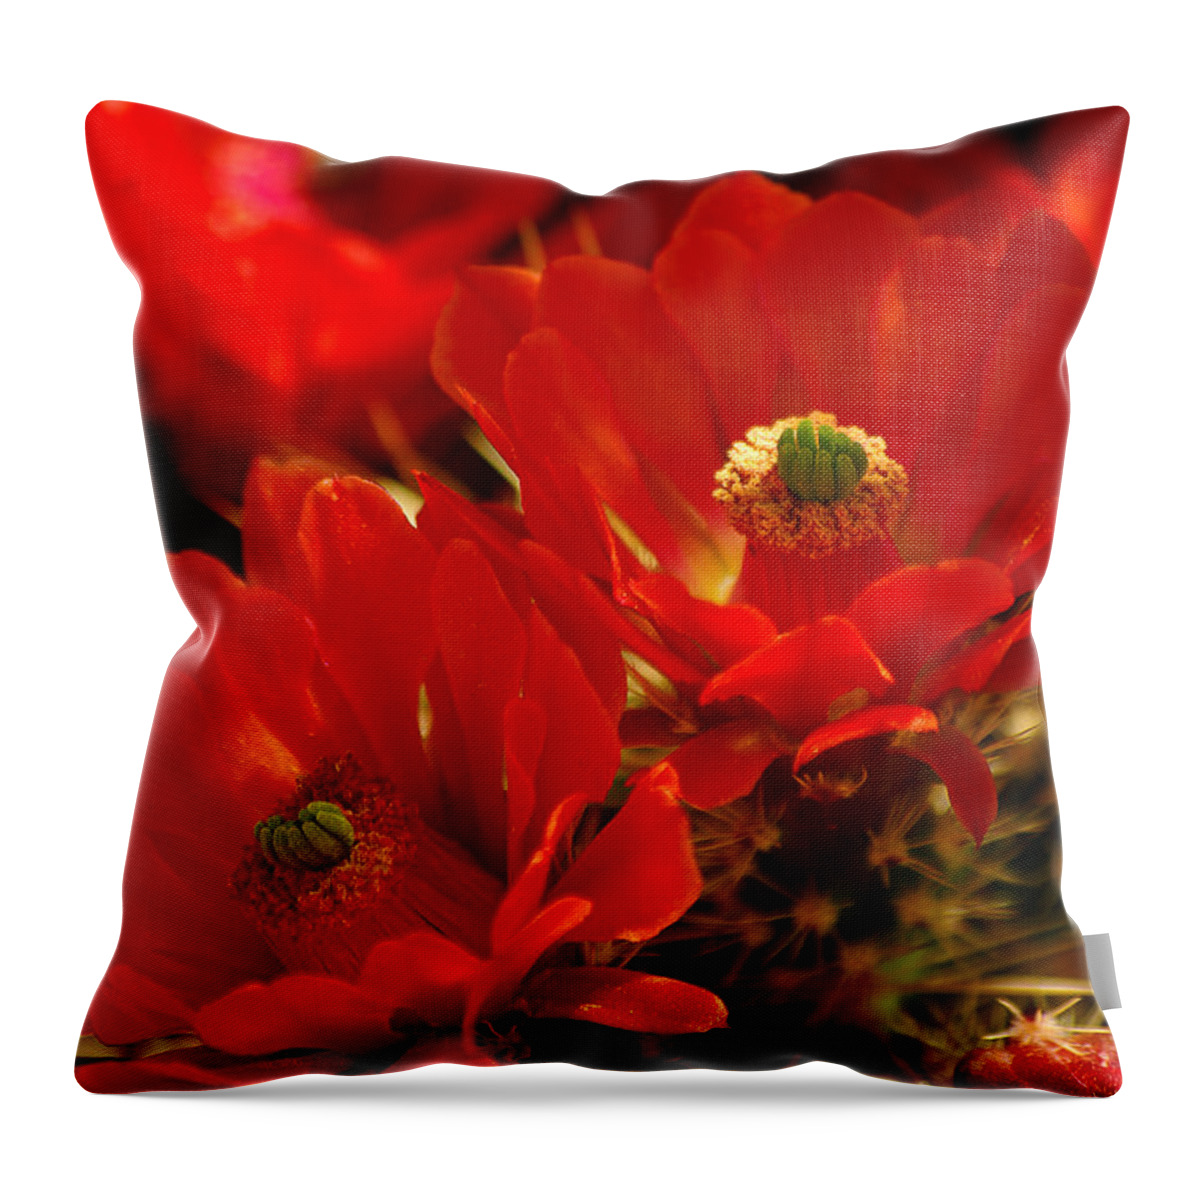 Columbus Throw Pillow featuring the photograph Vibrantly Red by Vicki Pelham